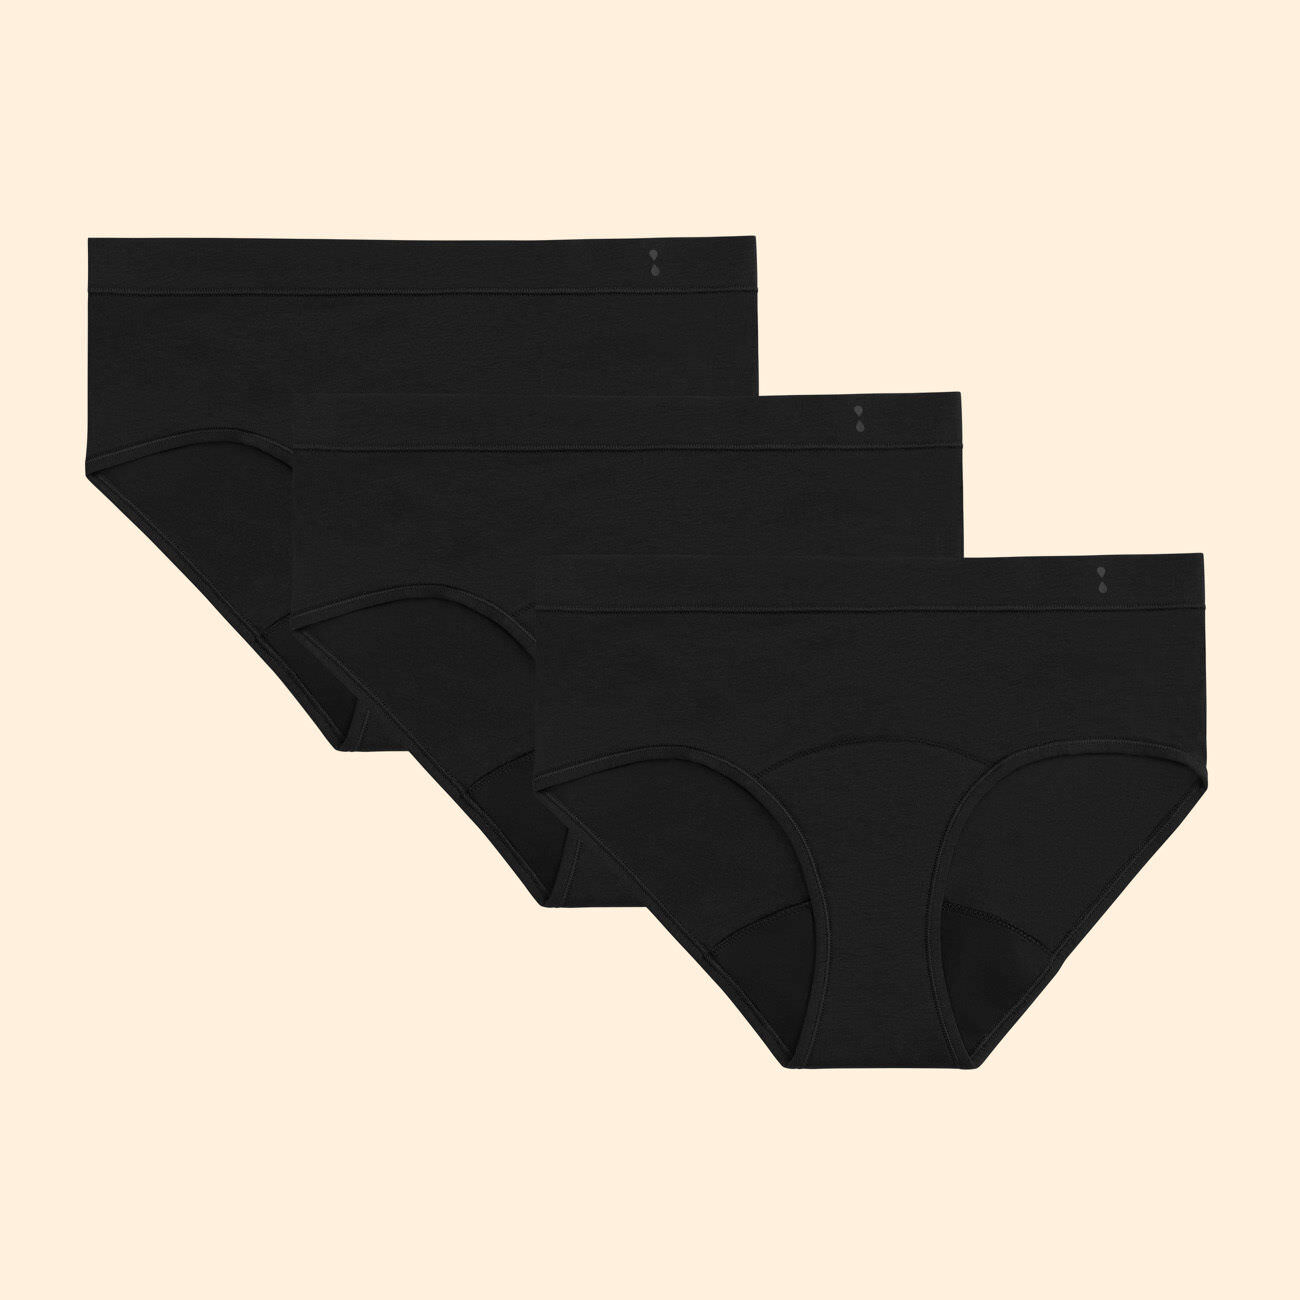 Thinx for All - Reusable Period Underwear Black Brief Super Absorbency Size  M